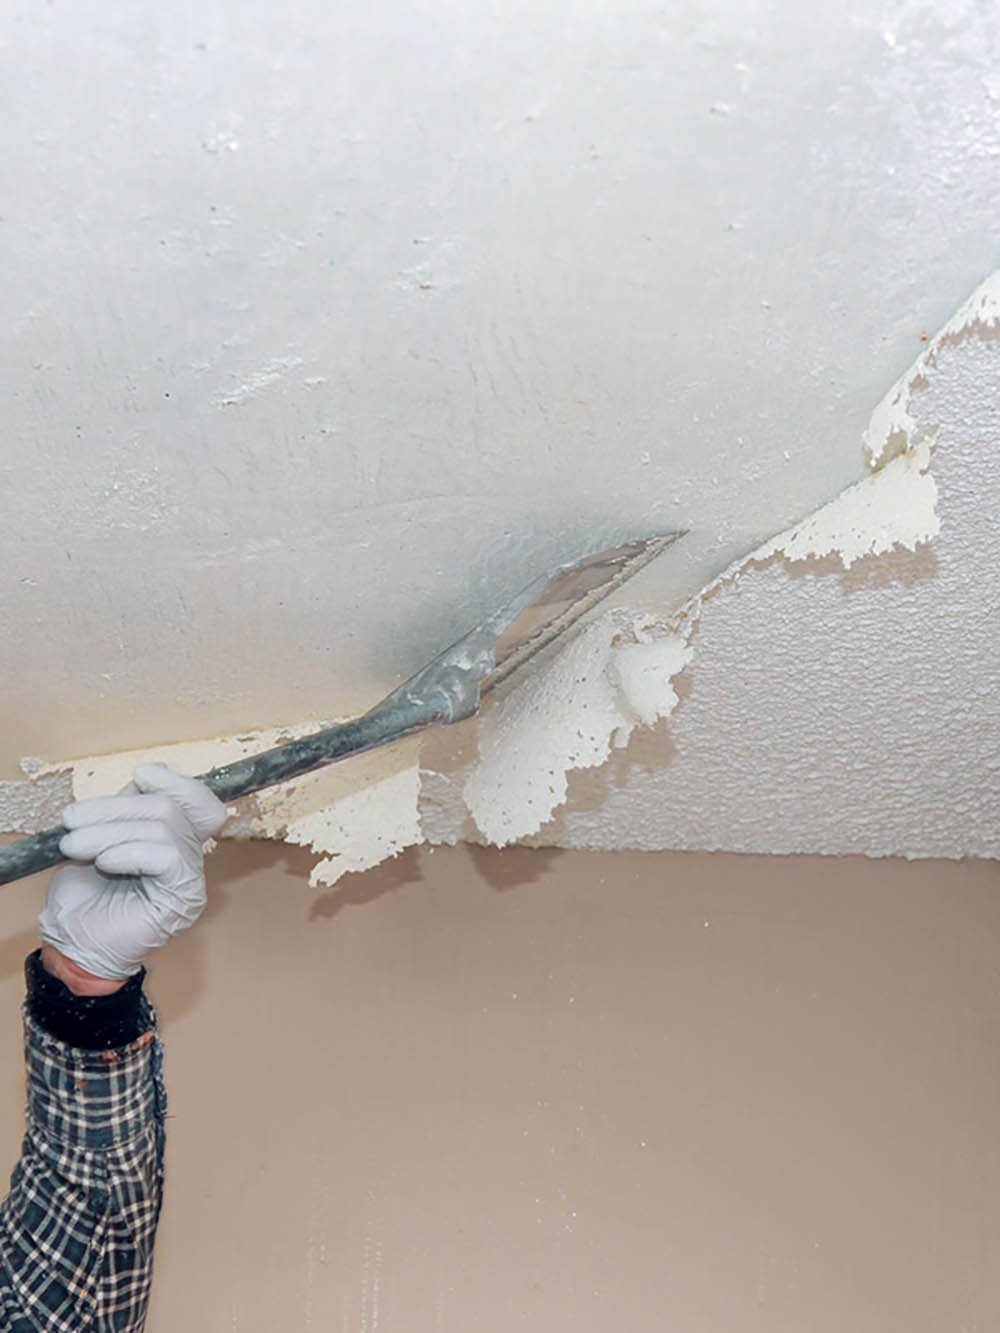 How Do You Remove Popcorn Ceilings?